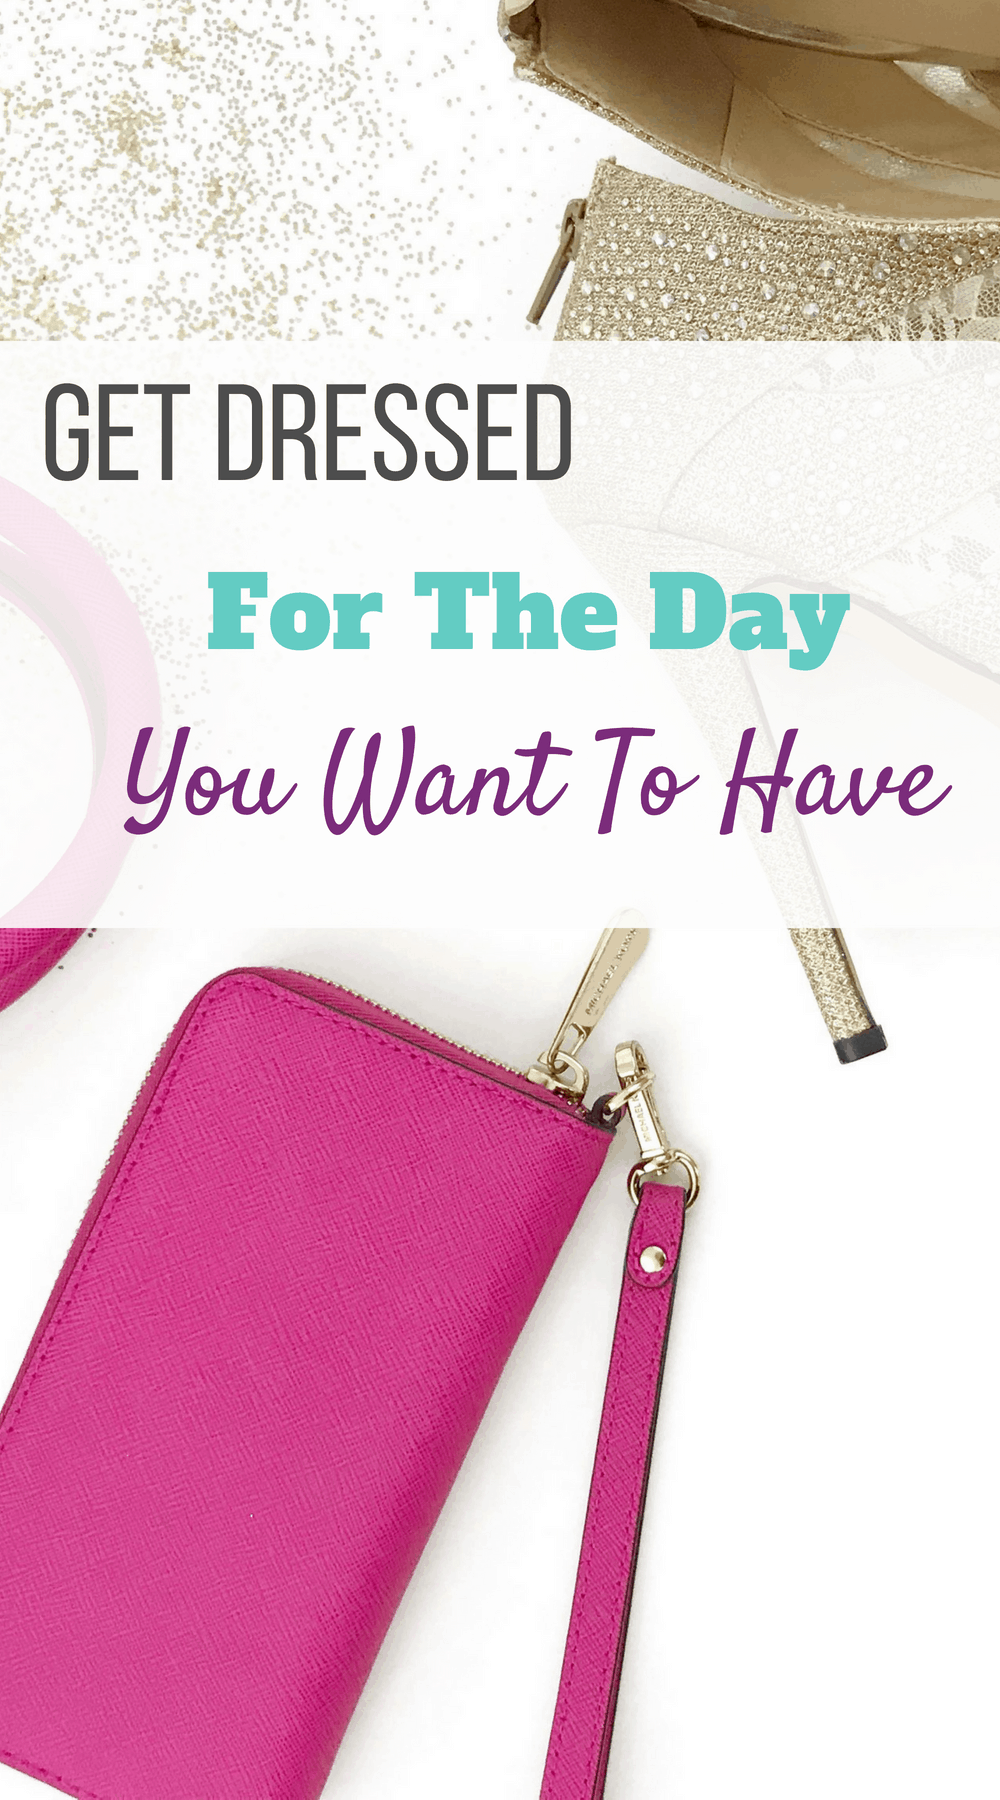 Get Dressed For The Day You Want To Have, Dress for success, getting dressed for productivity, dressing for success, work from home productivity, #dressforsuccess